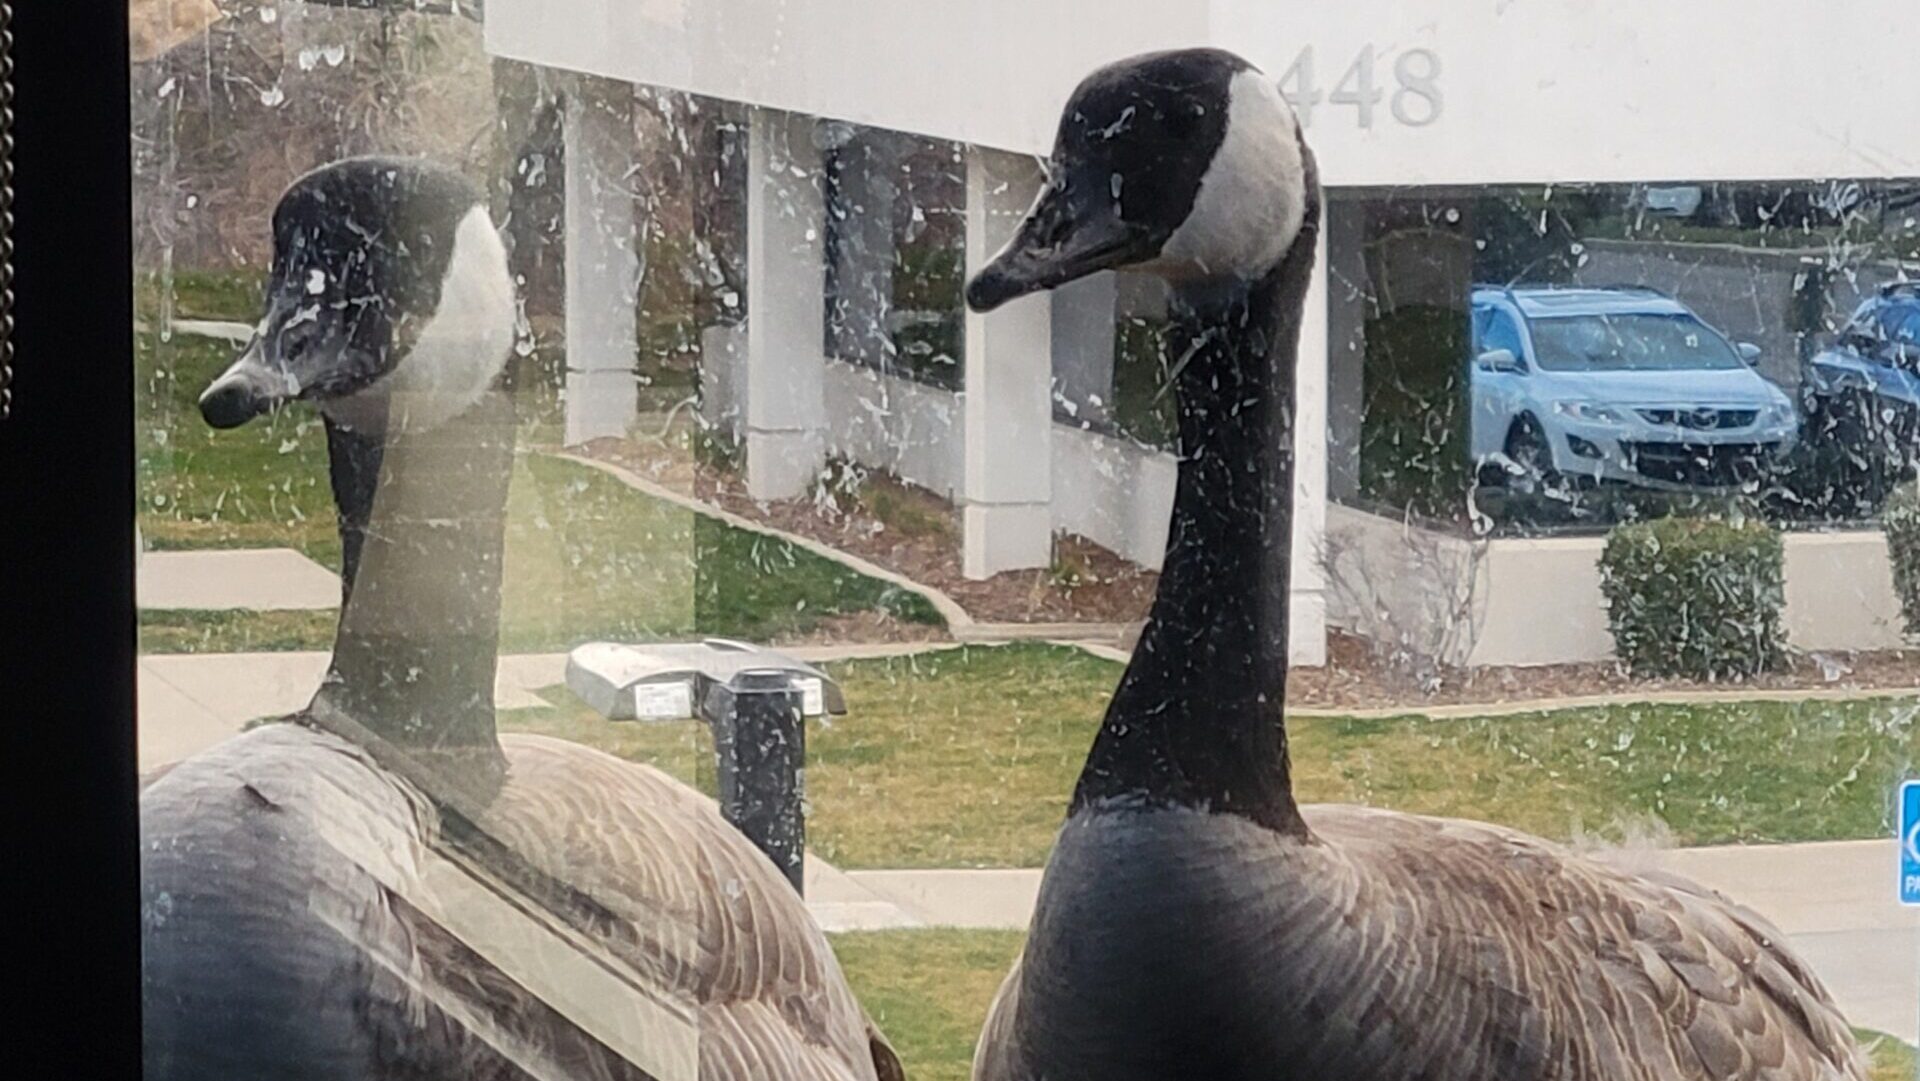 A Murray business is worried about the geese that have taken up residence on a small window ledge o...